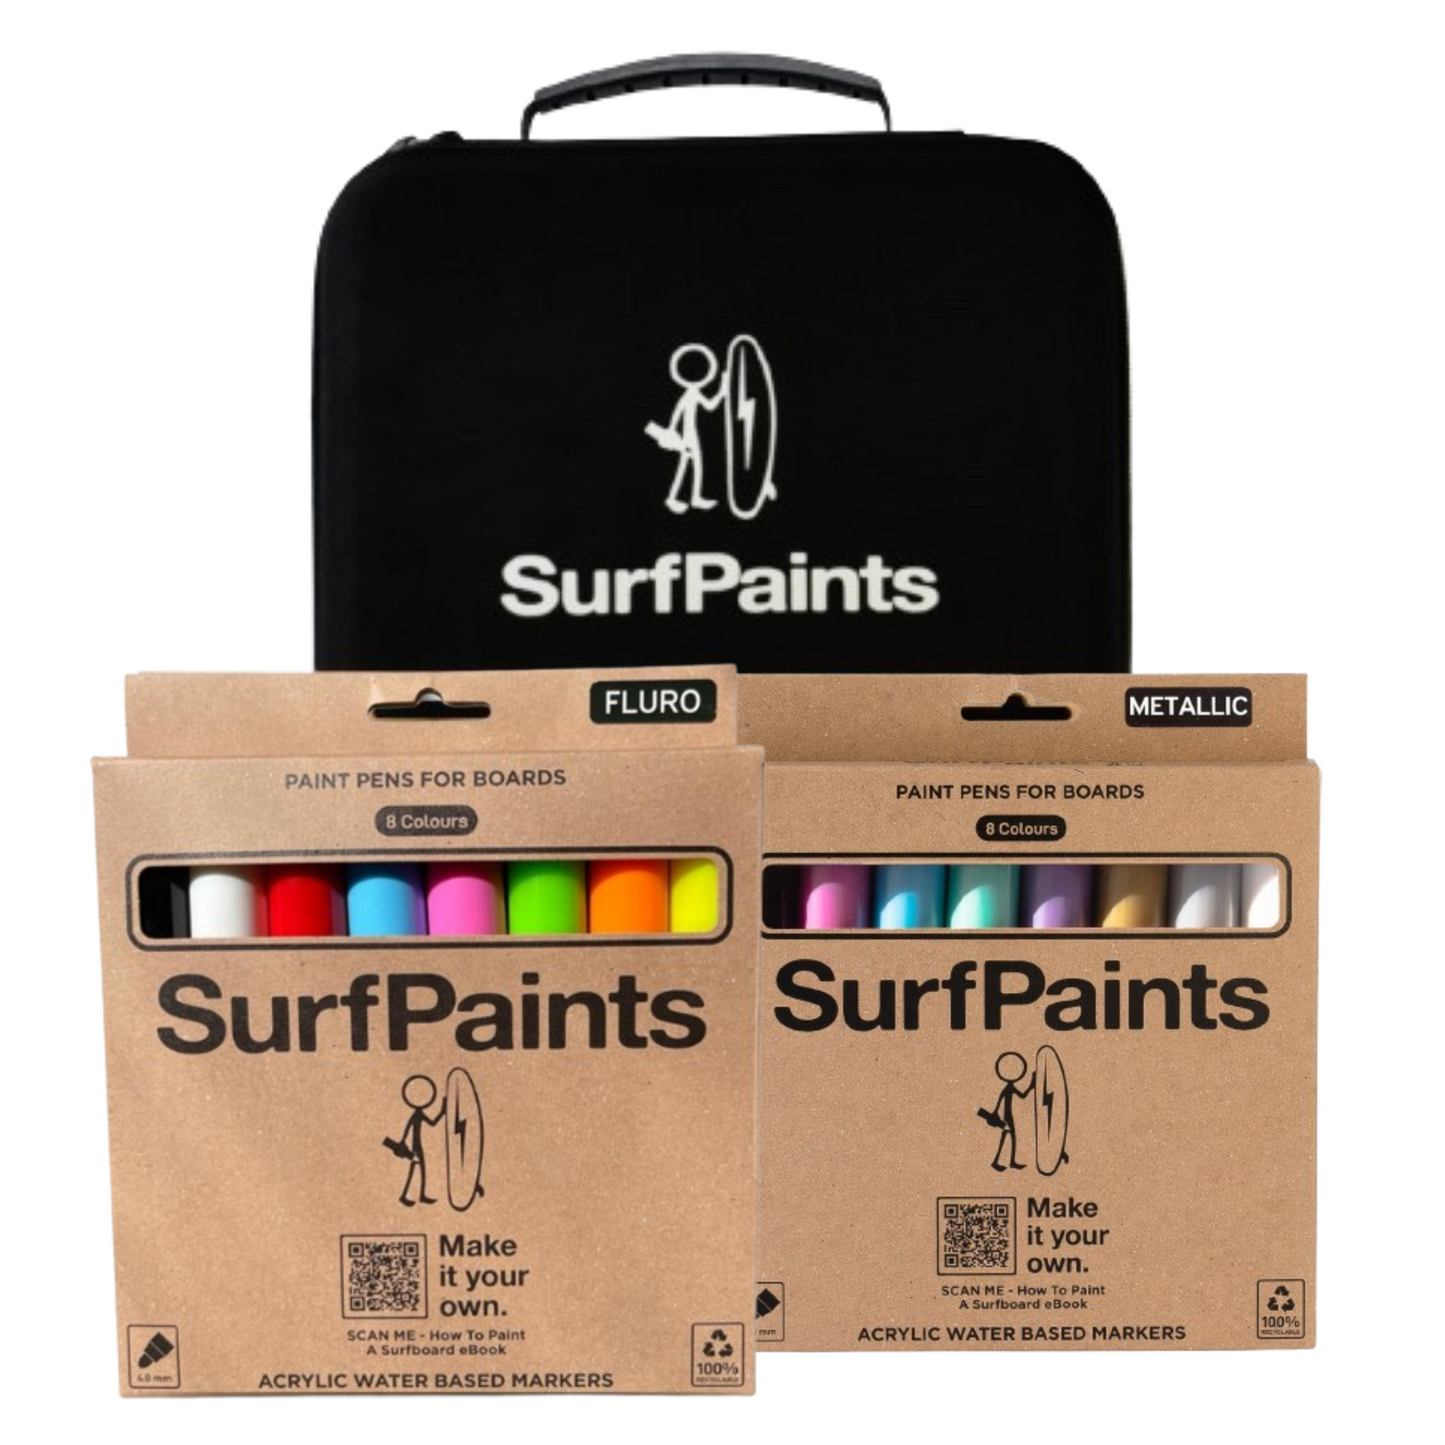 All-in-One DIY Surface Prep & Paint Starter Kit - Choose 2 Acrylic Sets